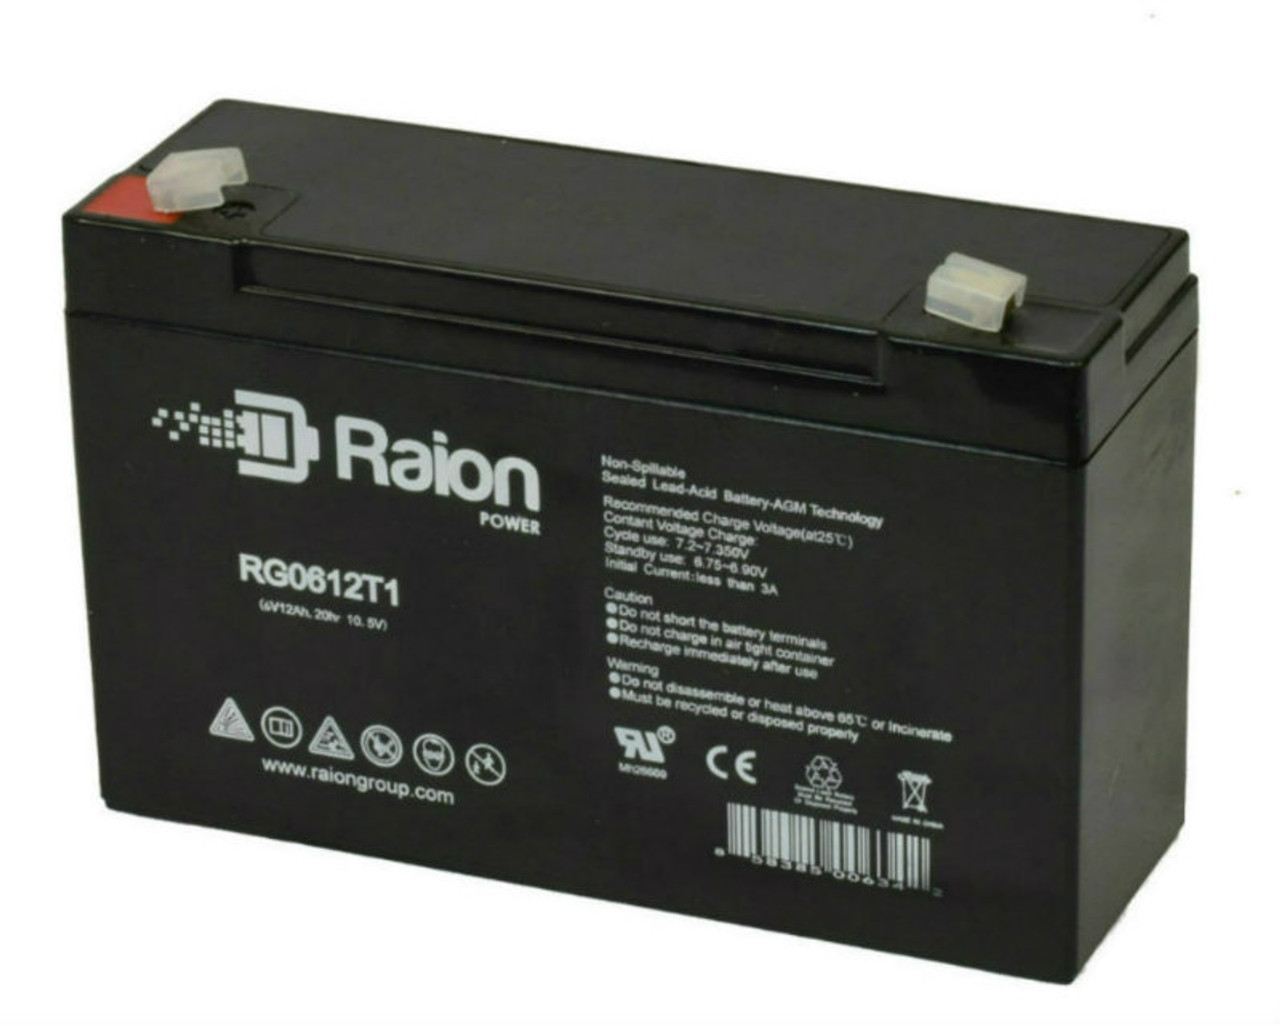 Raion Power RG06120T1 Replacement Battery for Streamlight Litebox